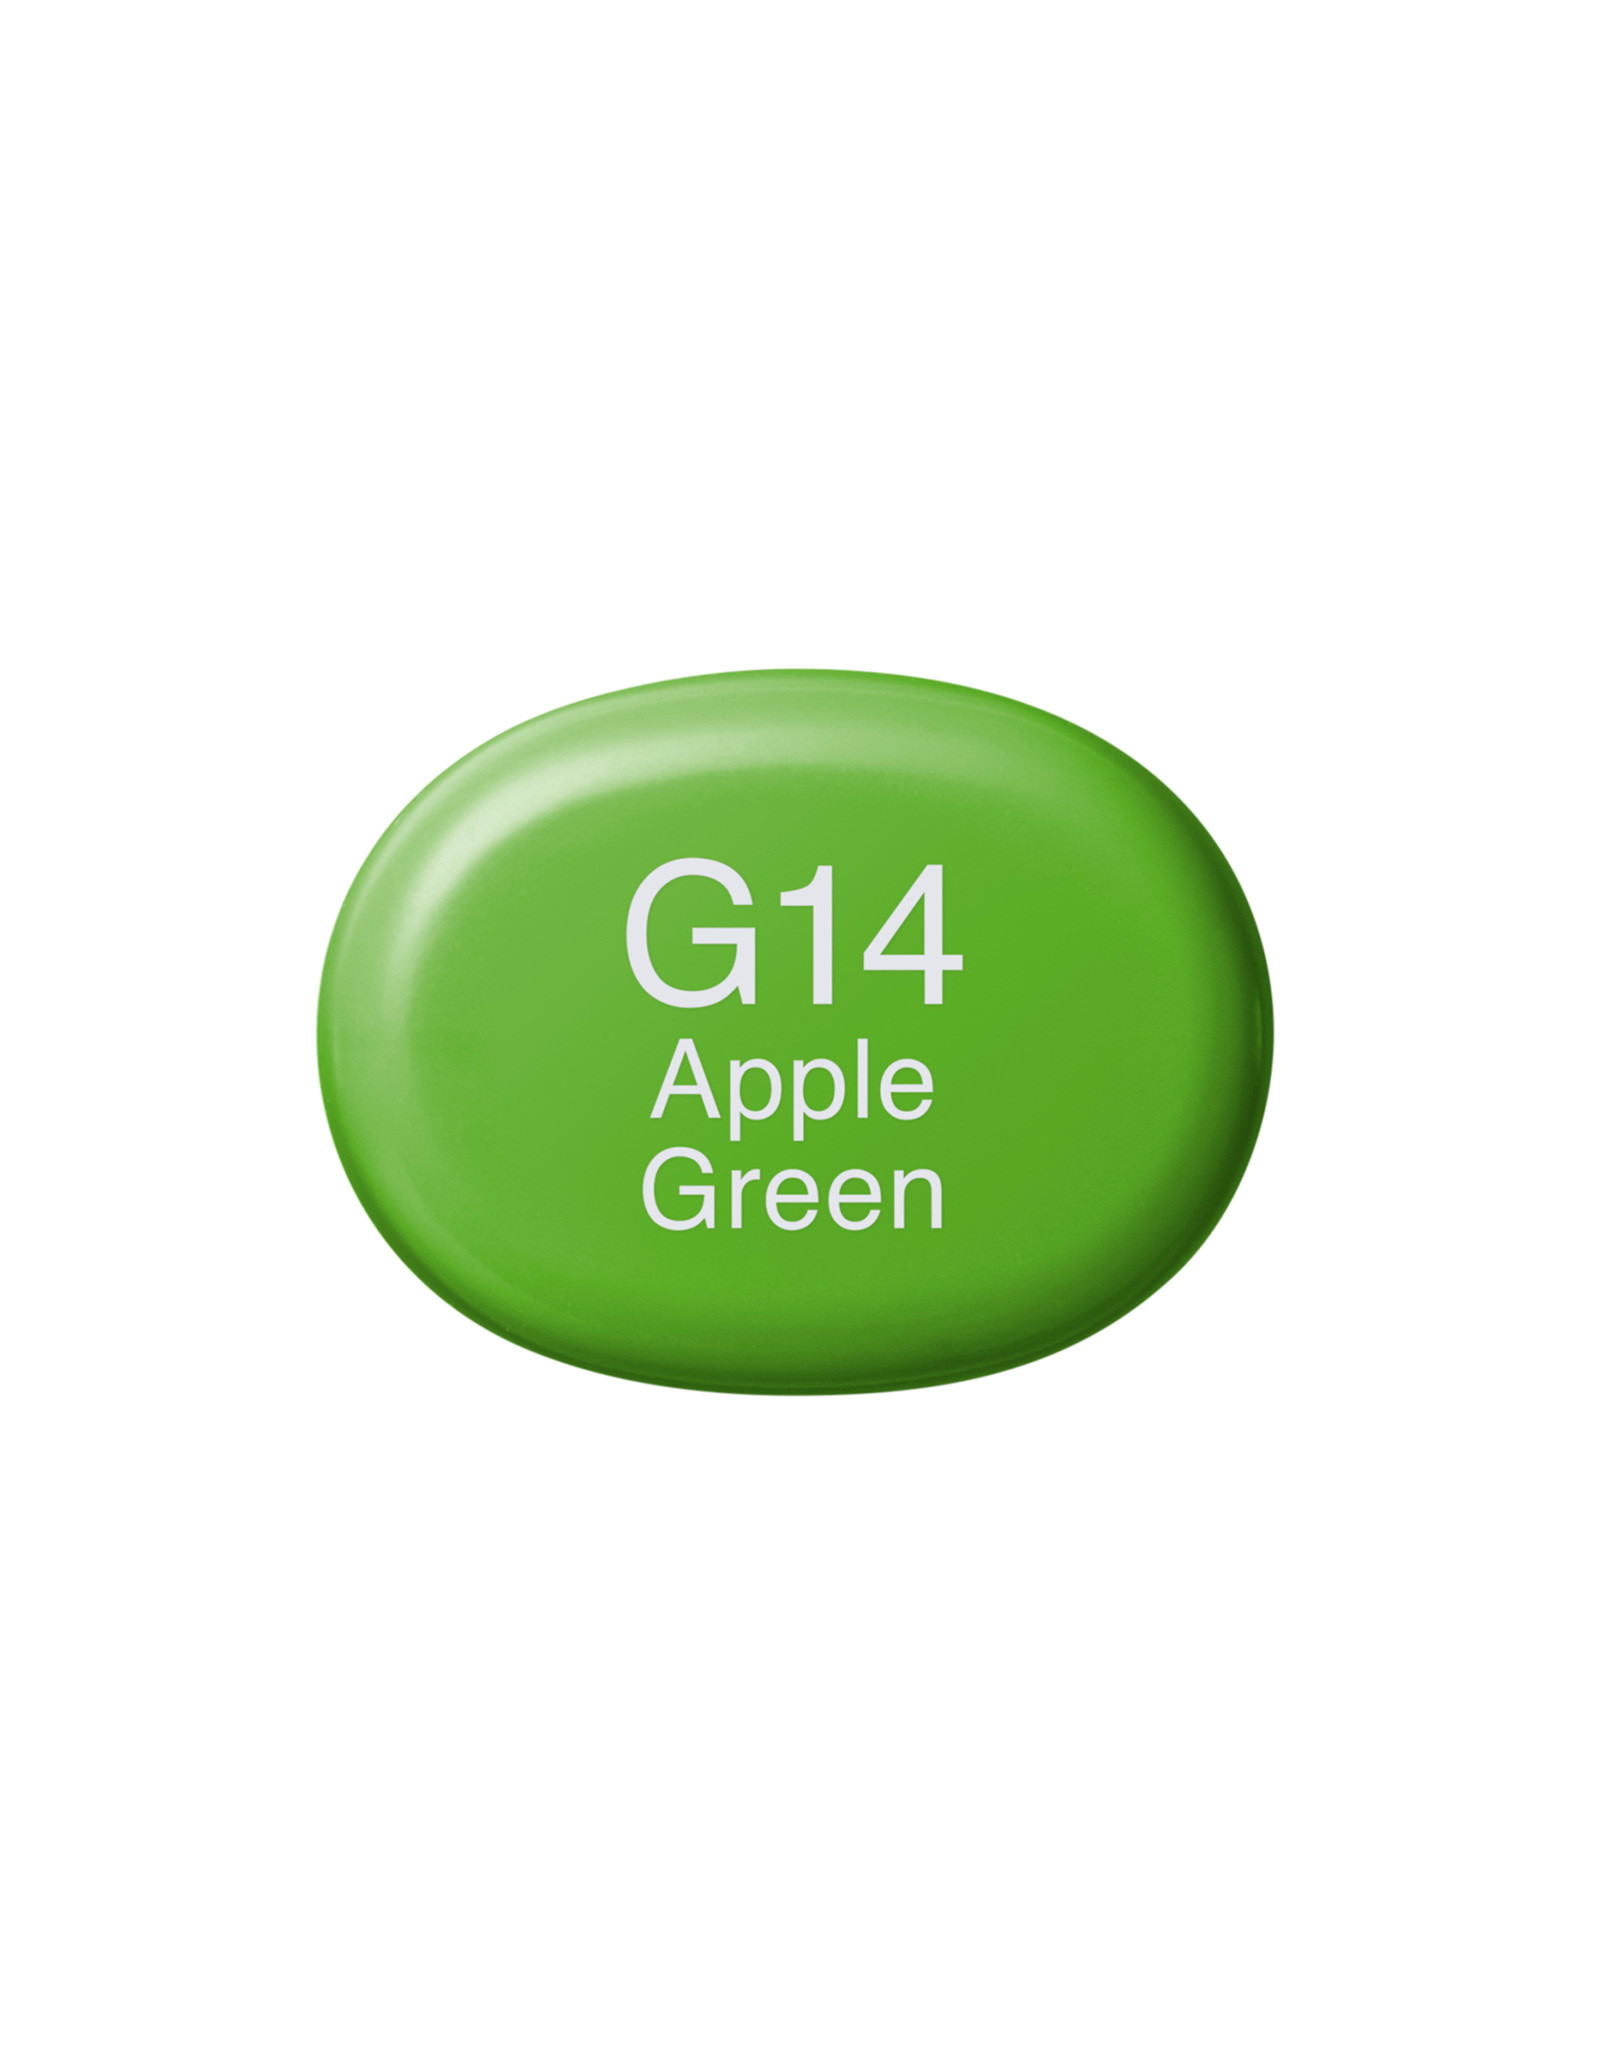 COPIC COPIC Sketch Marker G14 Apple Green